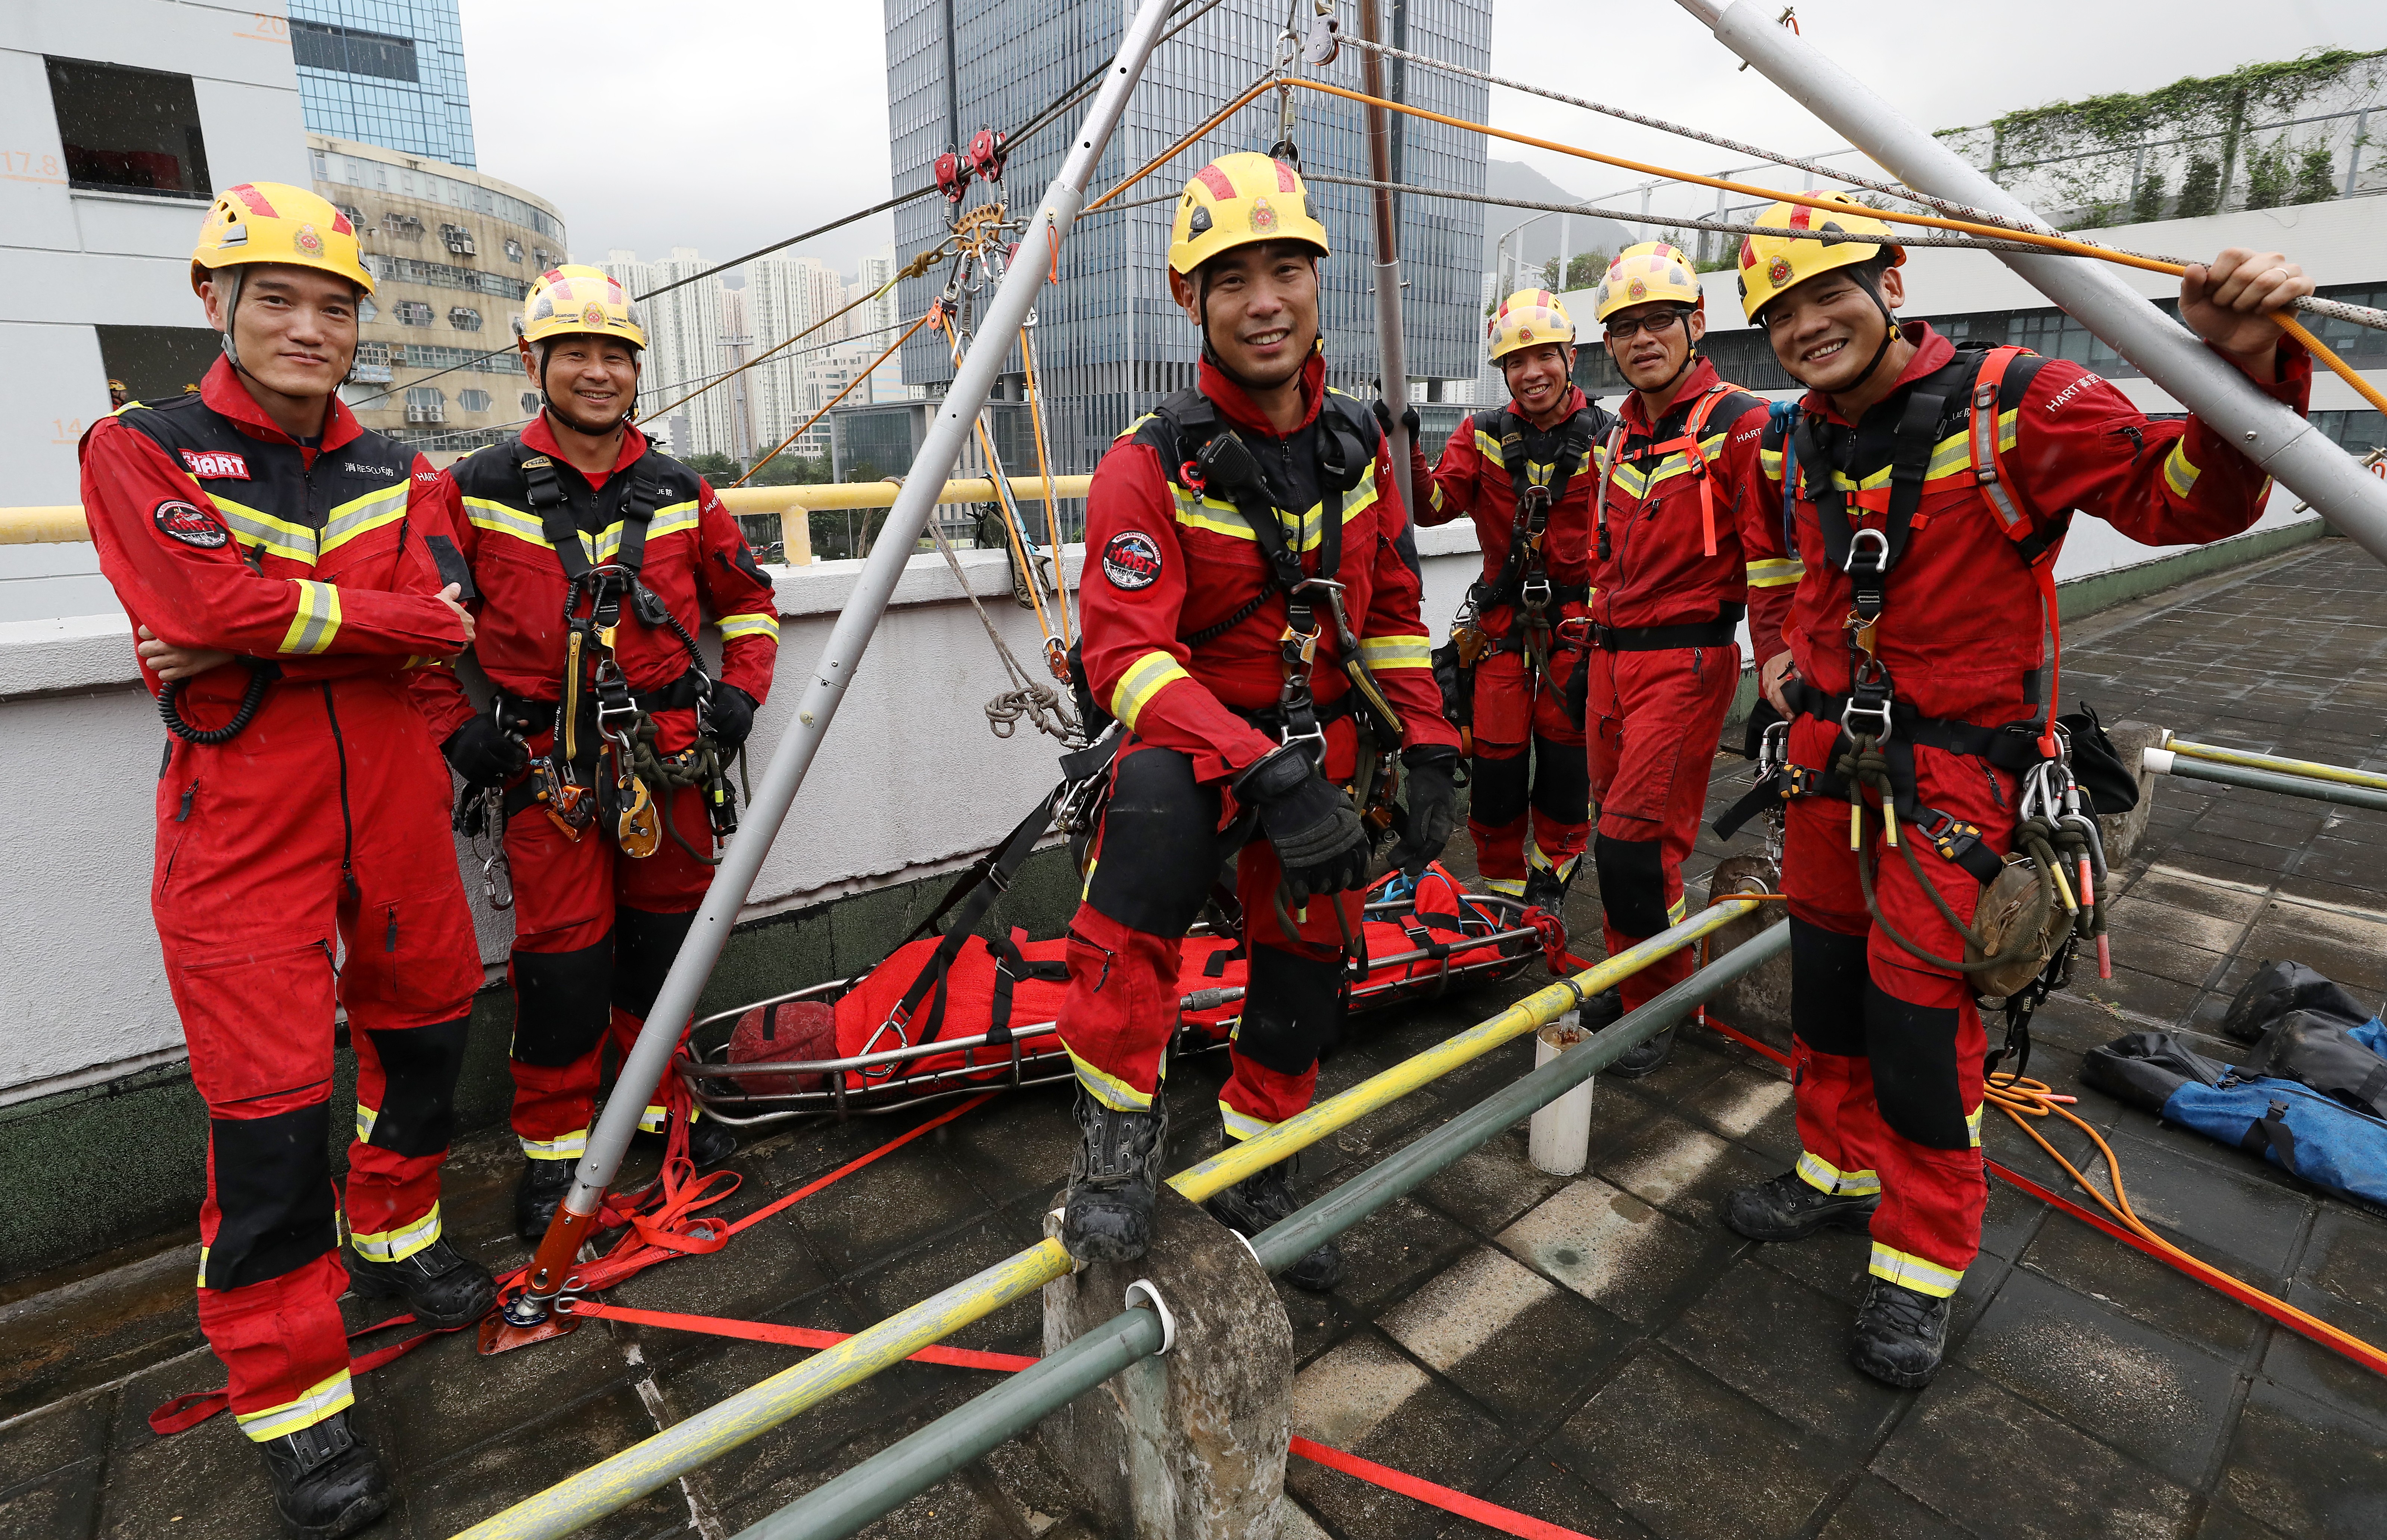 Members of Hong Kong’s high-angle rescue team. Photo: SCMP / Dickson Lee